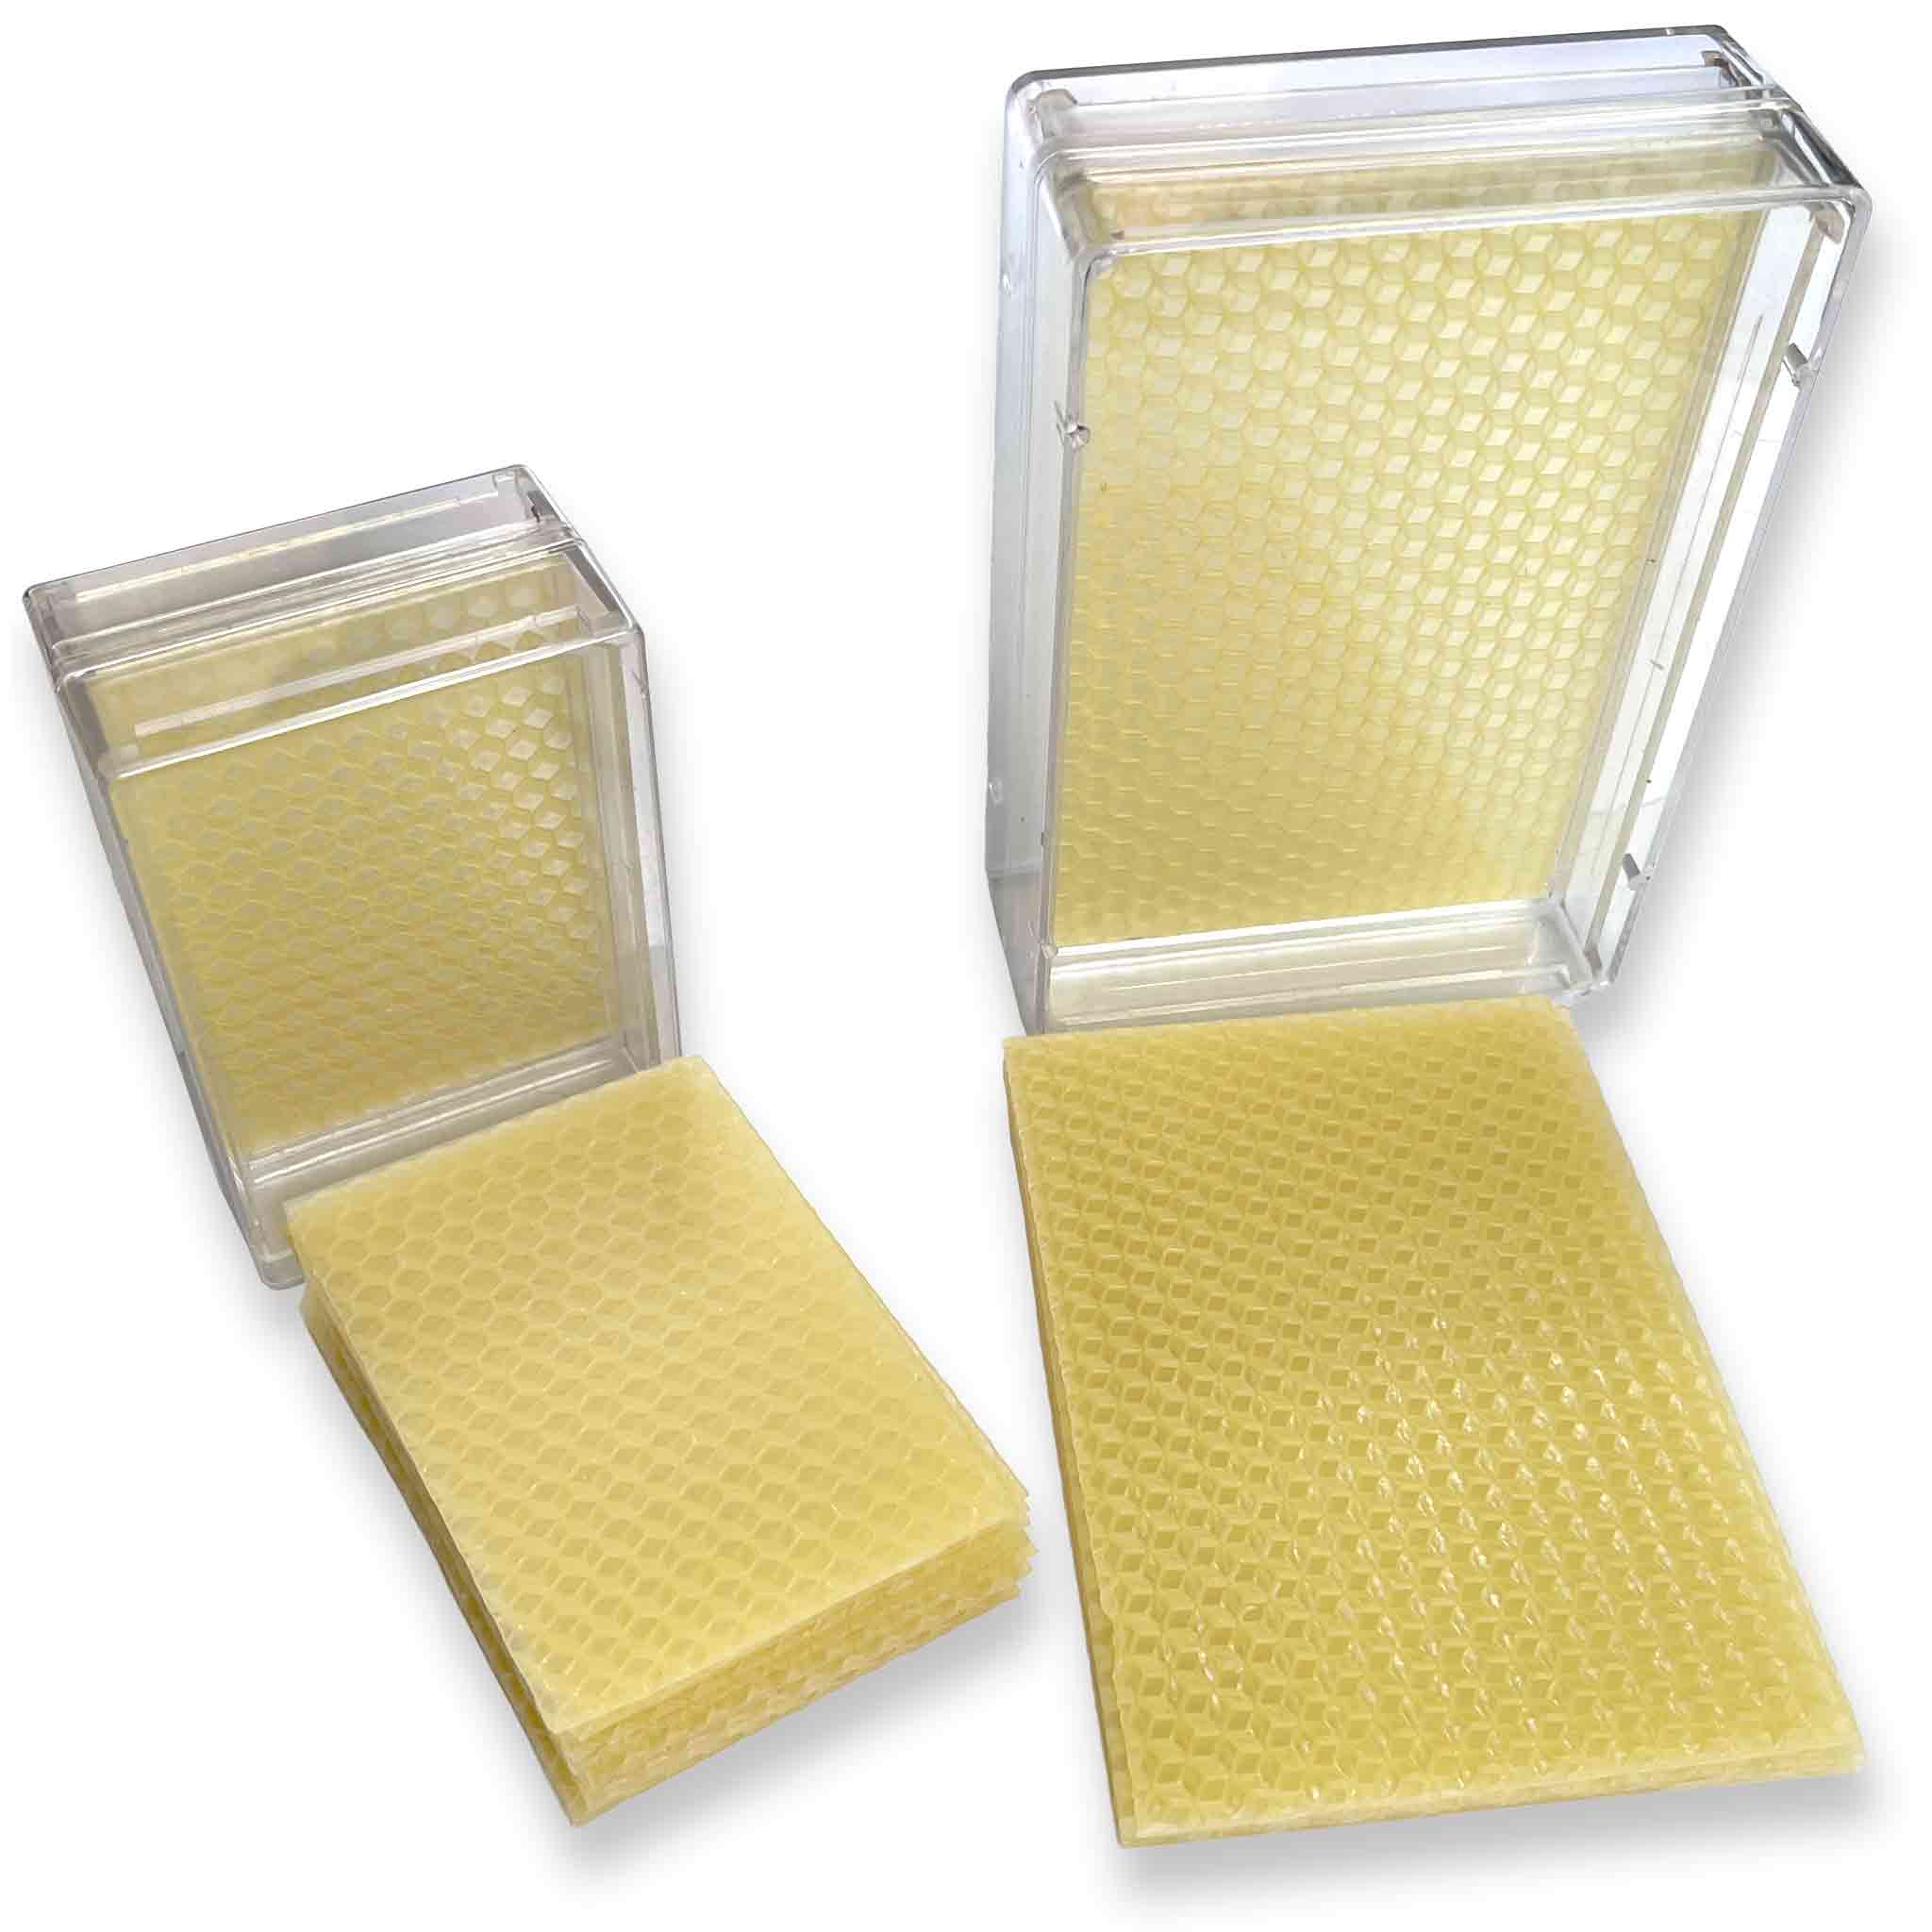 Containers Cassettes Frame Holder for Honey Comb - Processing collection by Buzzbee Beekeeping Supplies